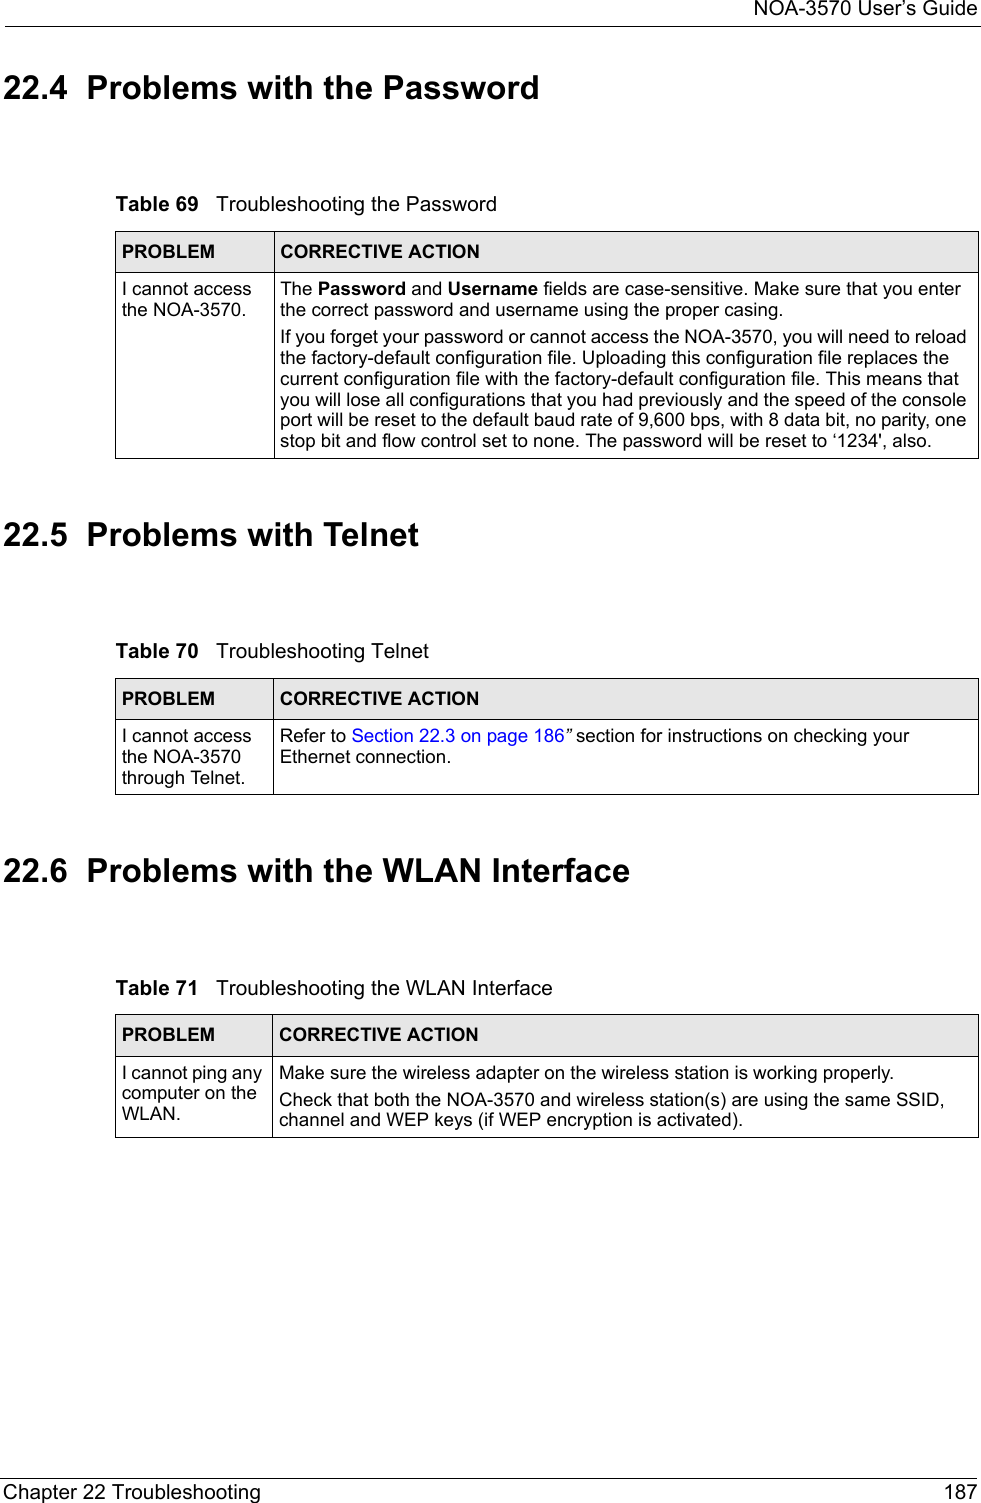 NOA-3570 User’s GuideChapter 22 Troubleshooting 18722.4  Problems with the Password22.5  Problems with Telnet22.6  Problems with the WLAN InterfaceTable 69   Troubleshooting the PasswordPROBLEM CORRECTIVE ACTIONI cannot access the NOA-3570.The Password and Username fields are case-sensitive. Make sure that you enter the correct password and username using the proper casing.If you forget your password or cannot access the NOA-3570, you will need to reload the factory-default configuration file. Uploading this configuration file replaces the current configuration file with the factory-default configuration file. This means that you will lose all configurations that you had previously and the speed of the console port will be reset to the default baud rate of 9,600 bps, with 8 data bit, no parity, one stop bit and flow control set to none. The password will be reset to ‘1234&apos;, also.Table 70   Troubleshooting TelnetPROBLEM CORRECTIVE ACTIONI cannot access the NOA-3570 through Telnet. Refer to Section 22.3 on page 186” section for instructions on checking your Ethernet connection.Table 71   Troubleshooting the WLAN InterfacePROBLEM CORRECTIVE ACTIONI cannot ping any computer on the WLAN.Make sure the wireless adapter on the wireless station is working properly.Check that both the NOA-3570 and wireless station(s) are using the same SSID, channel and WEP keys (if WEP encryption is activated).